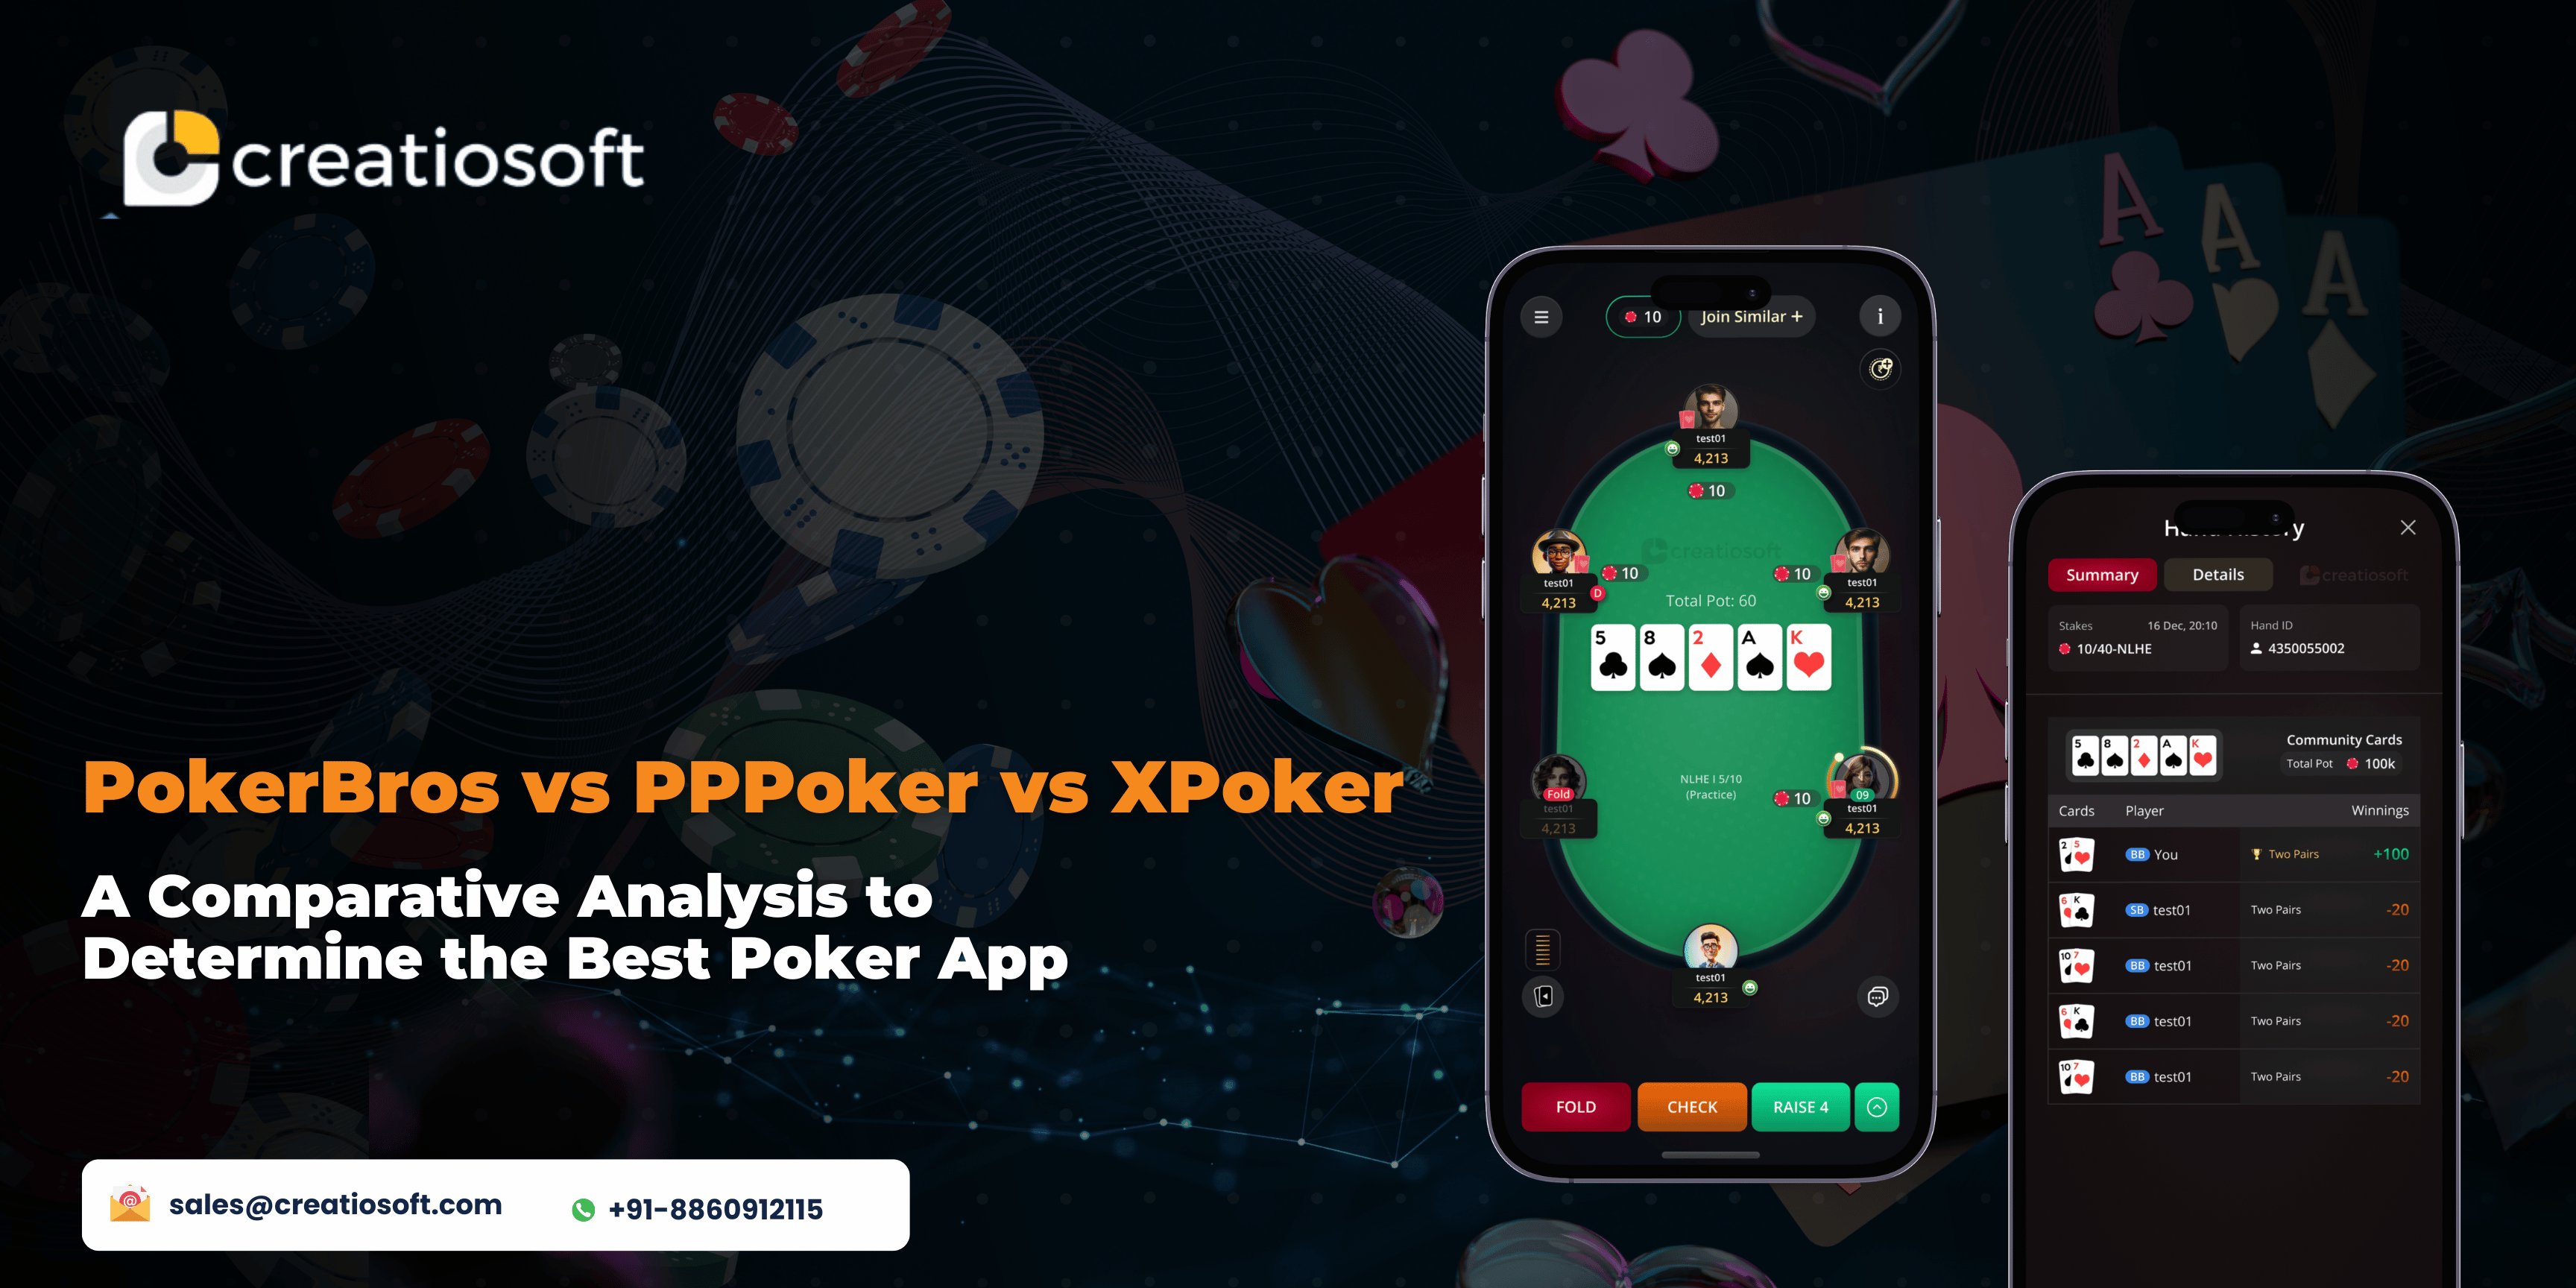 Social Mobile Poker App PokerBros Continues to Expand its Game Offerings,  Adds Pineapple Poker